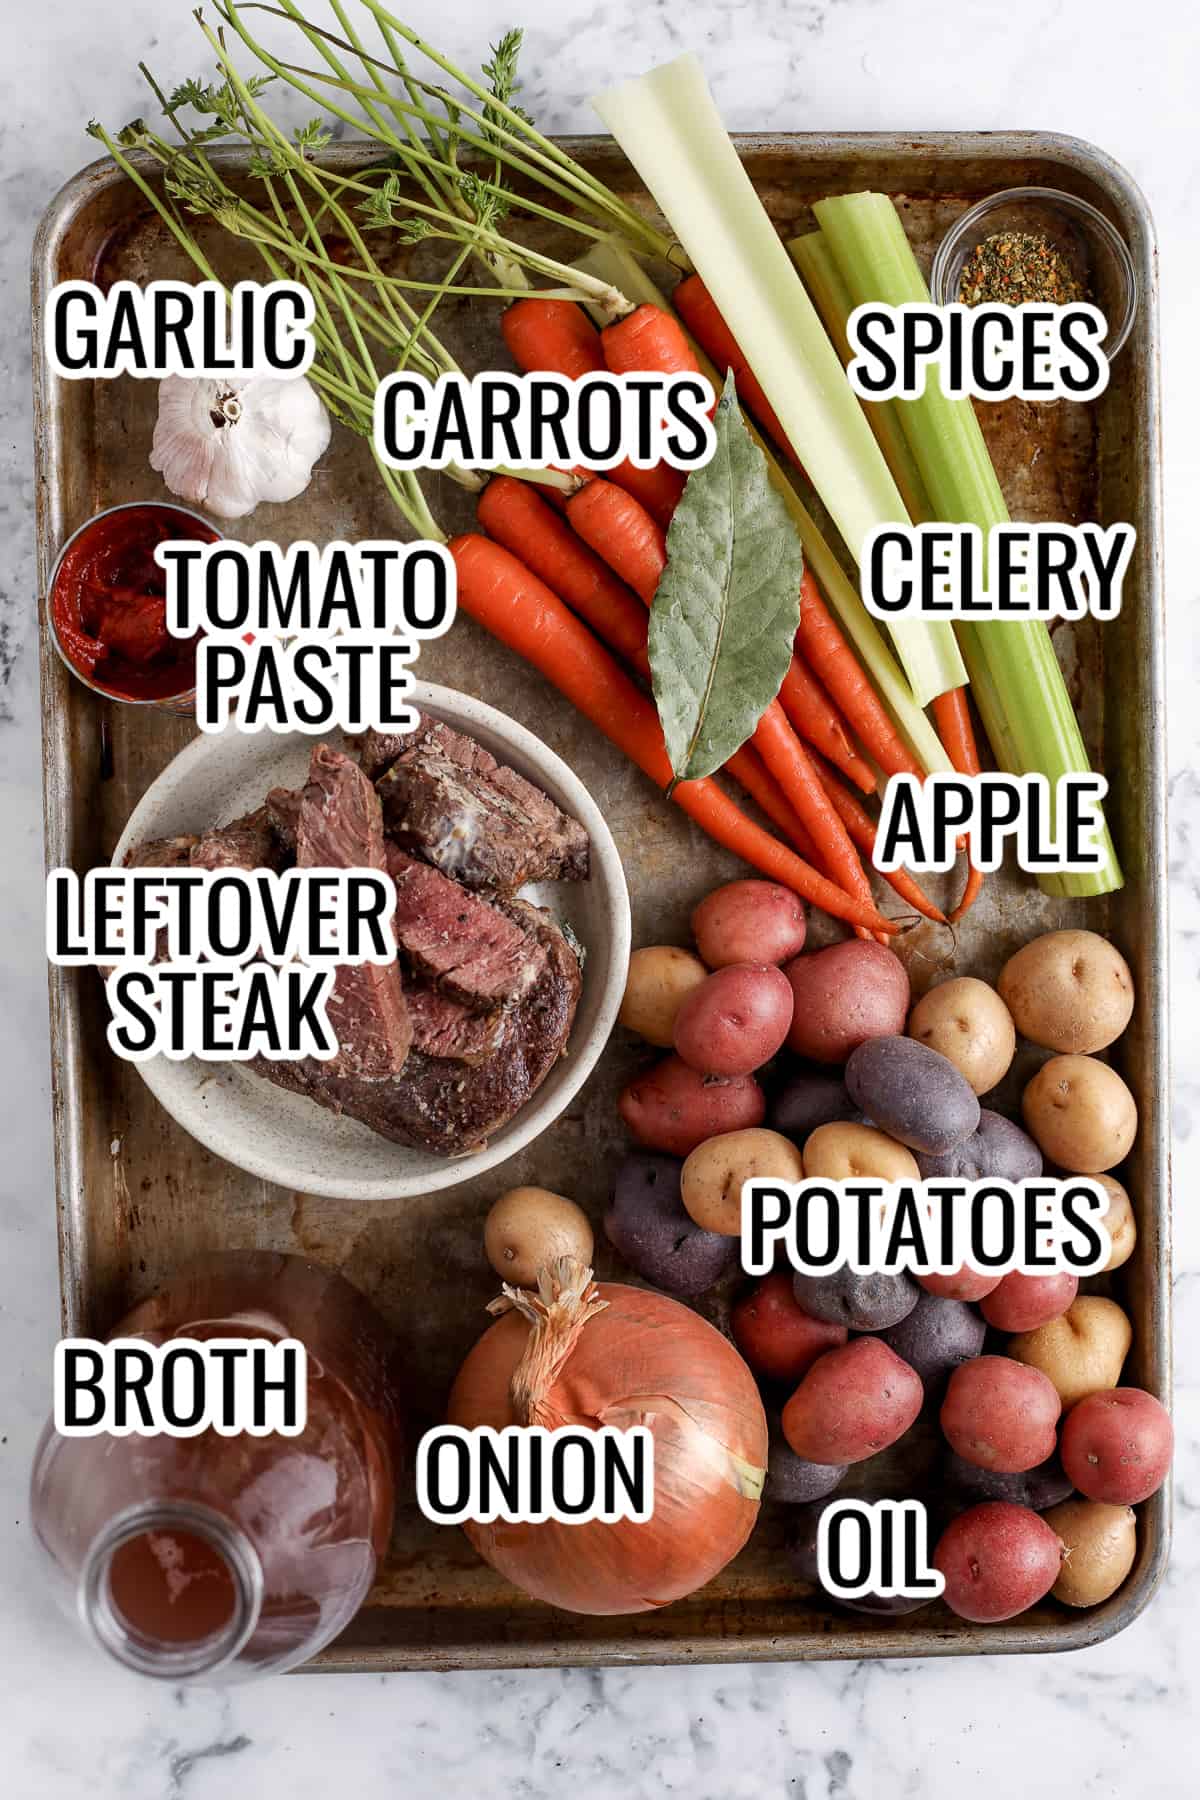 ingredients assembled to make instant pot stew with leftover steak, including potatoes, carrots, celery, steak, broth, onions, and tomato paste